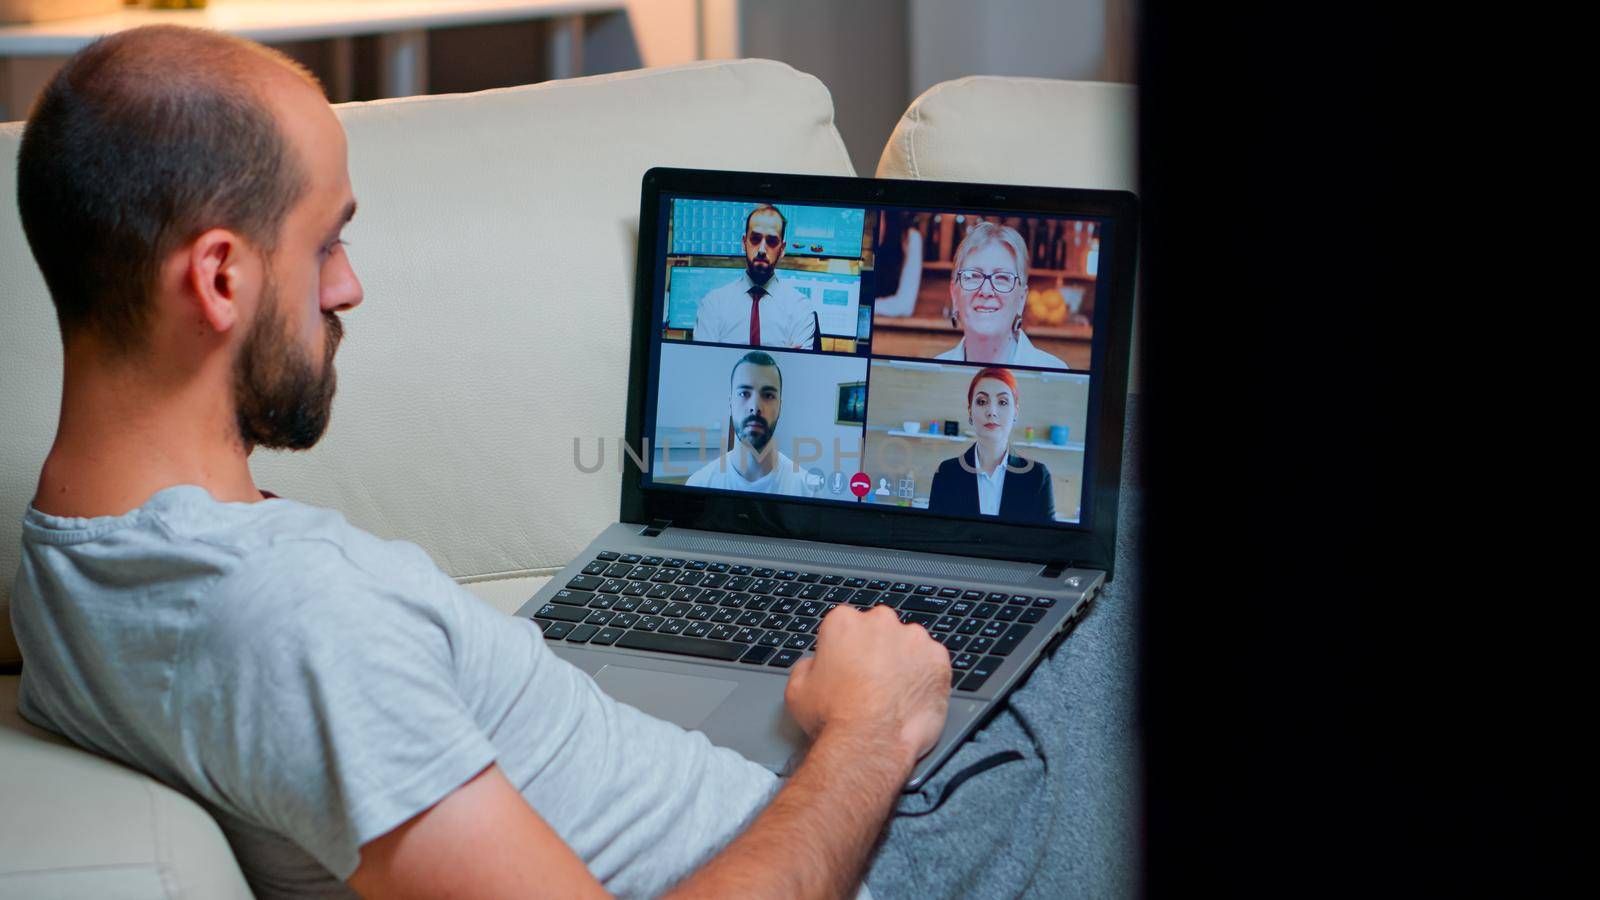 Over shoulder view of man in pajamas having online conversation with teammates by DCStudio